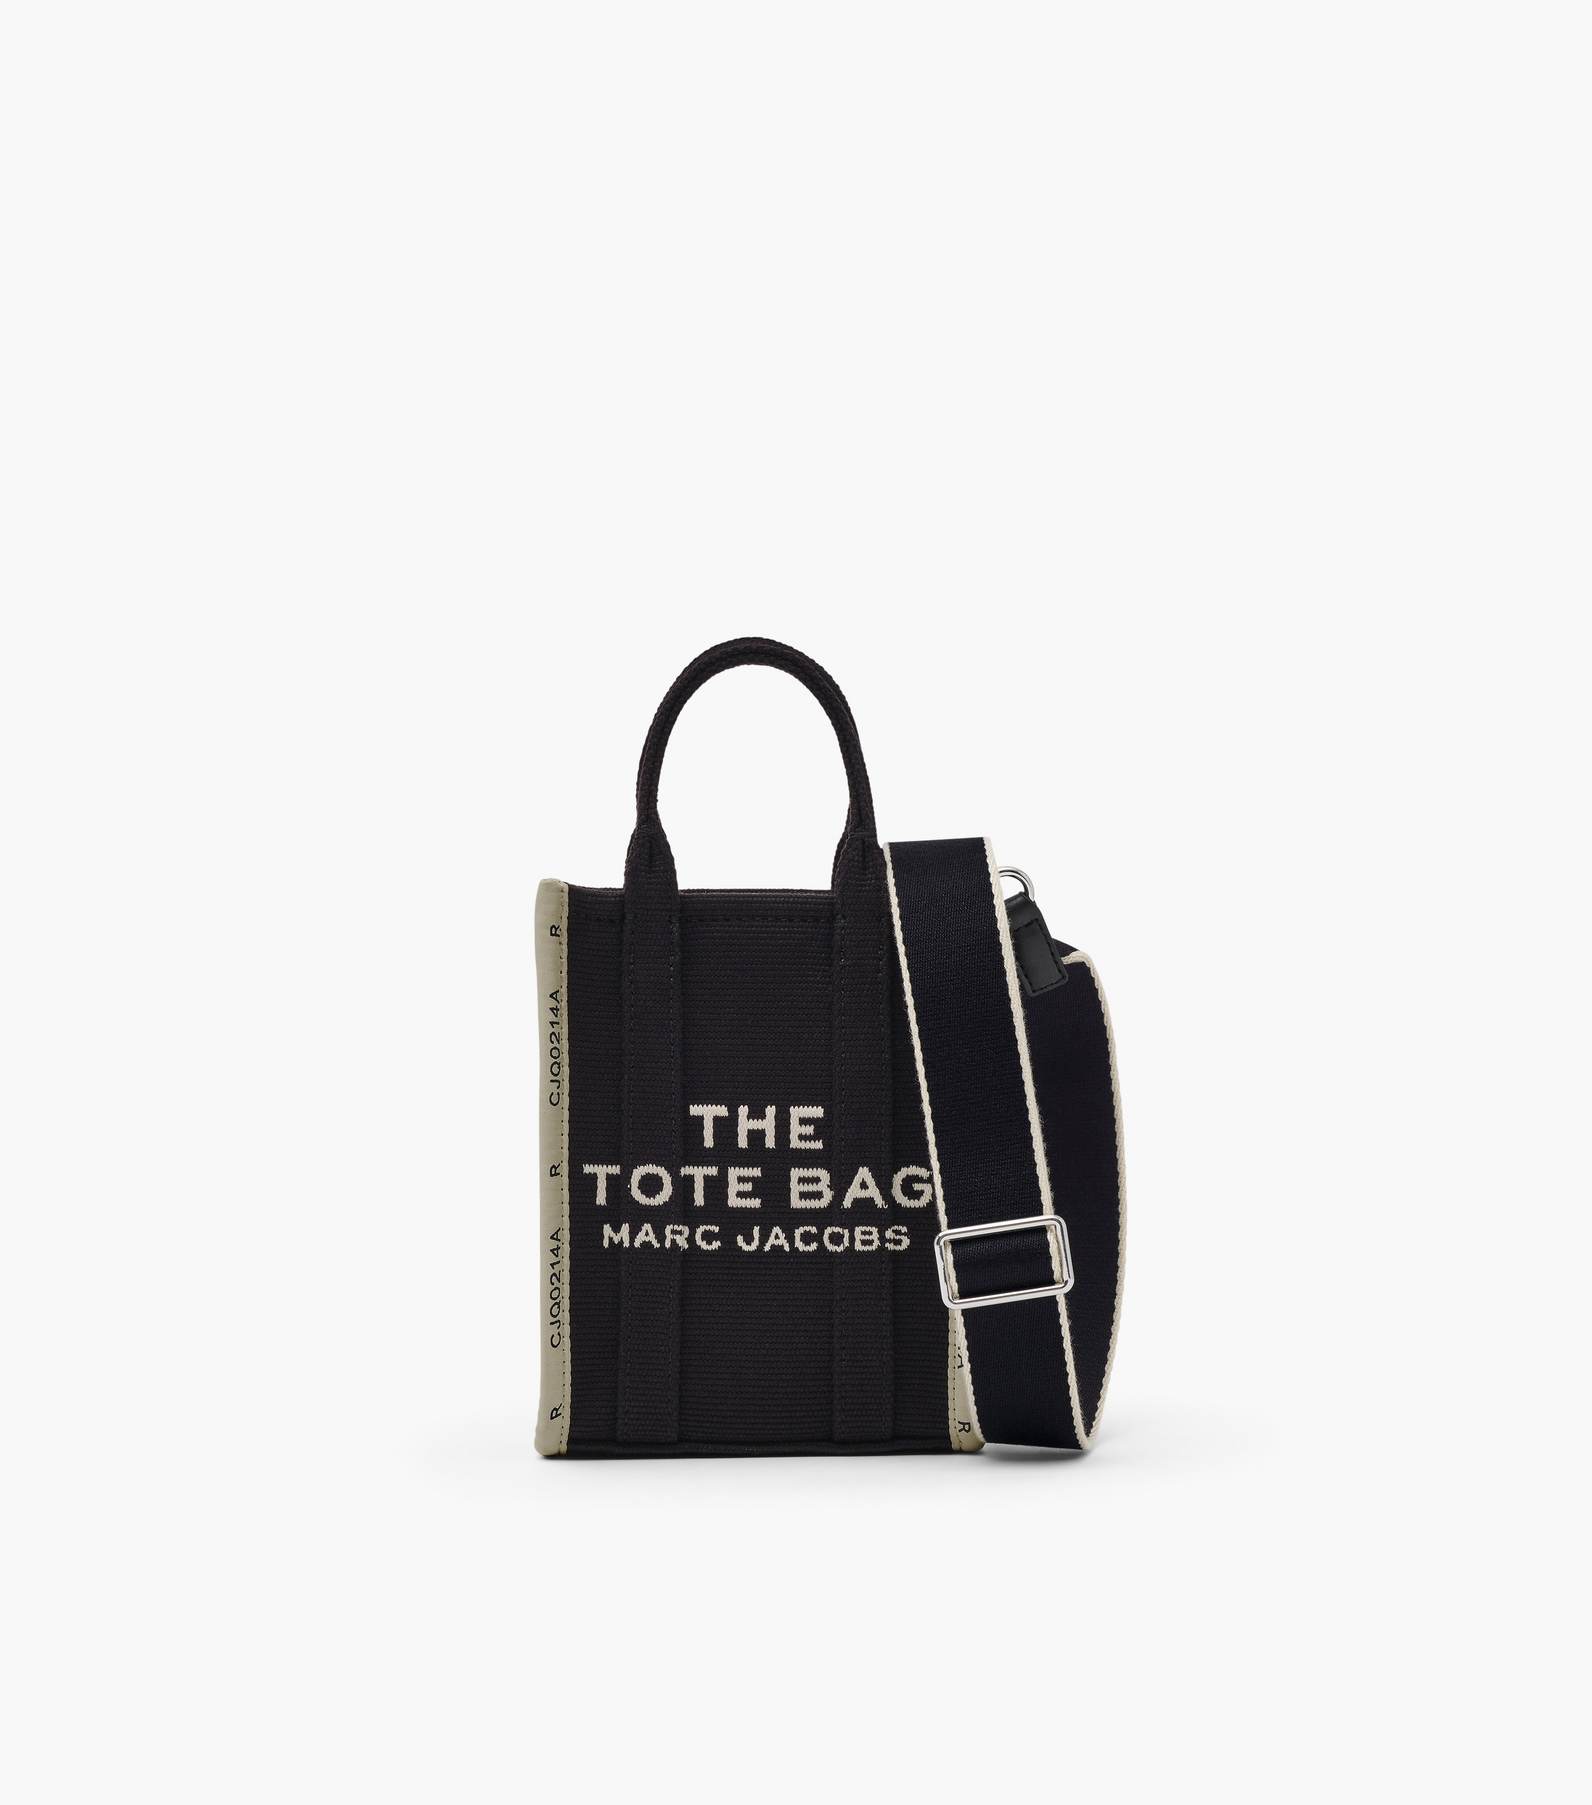 The Small canvas tote bag in black - Marc Jacobs